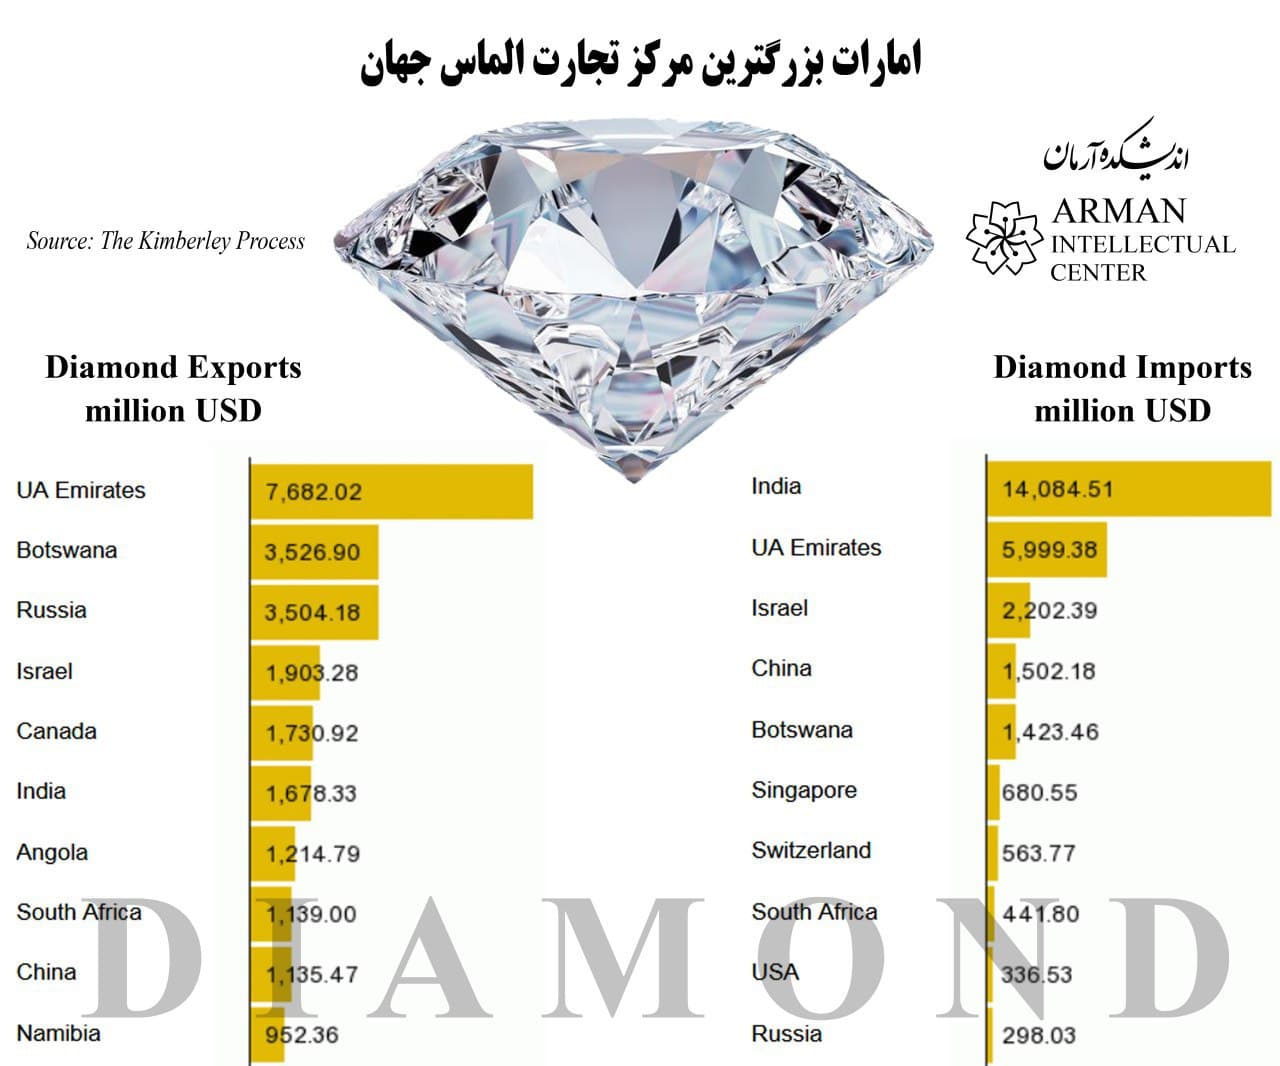 The largest diamond trade centers in the world